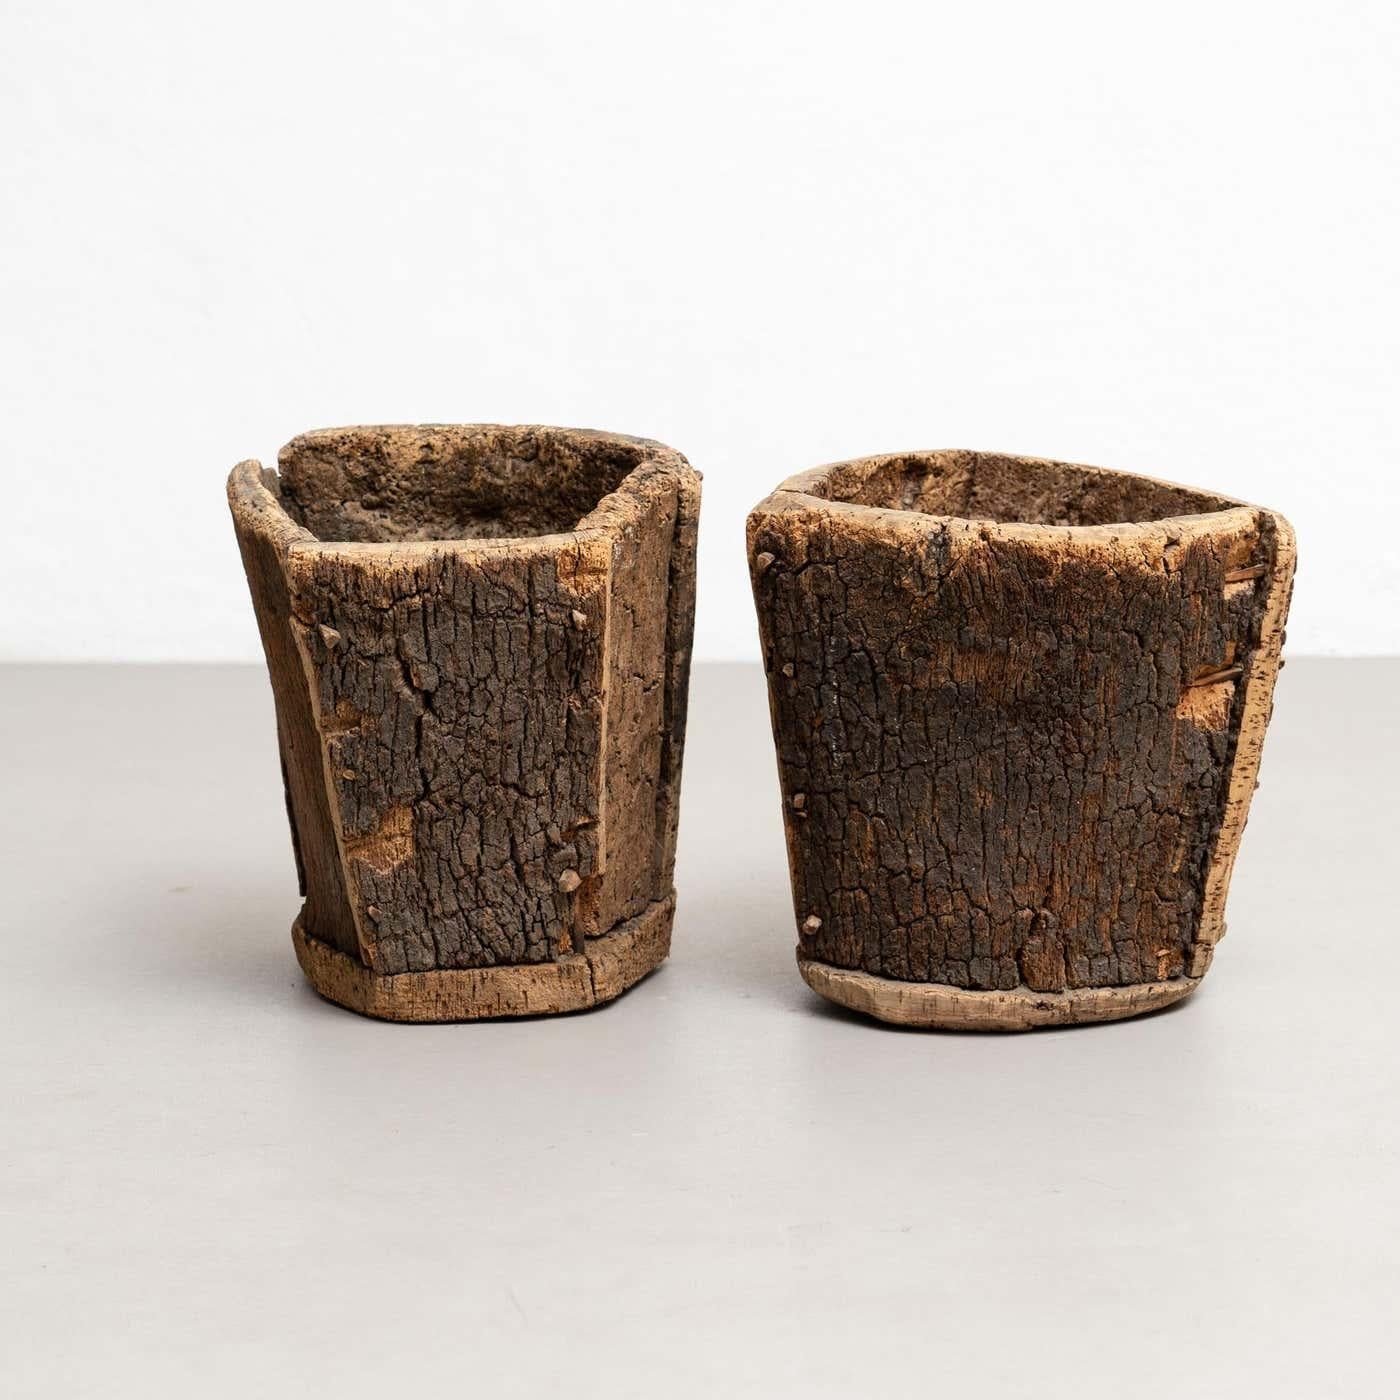 French Brutalist Romance: Pair of Vintage Cork Trash Bins from the Early 20th Century For Sale